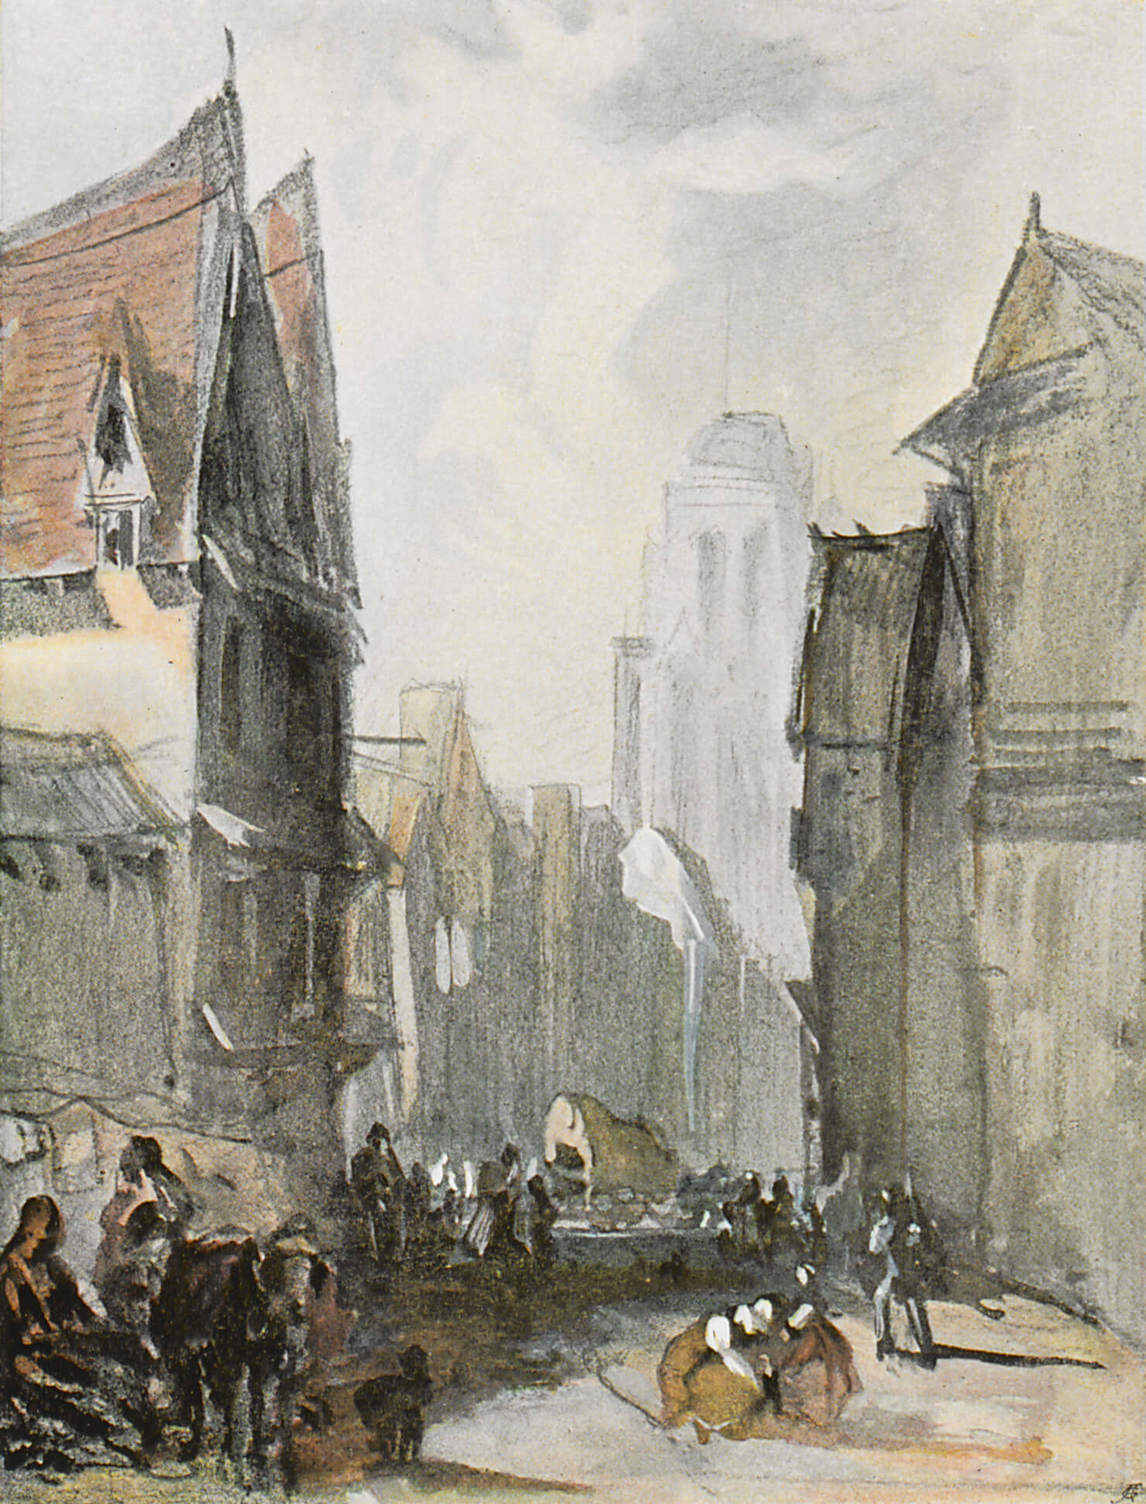 Art Canada Institute, Richard Parkes Bonington, watercolour of A Street in Rouen, reproduced in The Studio: An Illustrated Magazine of Fine & Applied Art 33, 1904